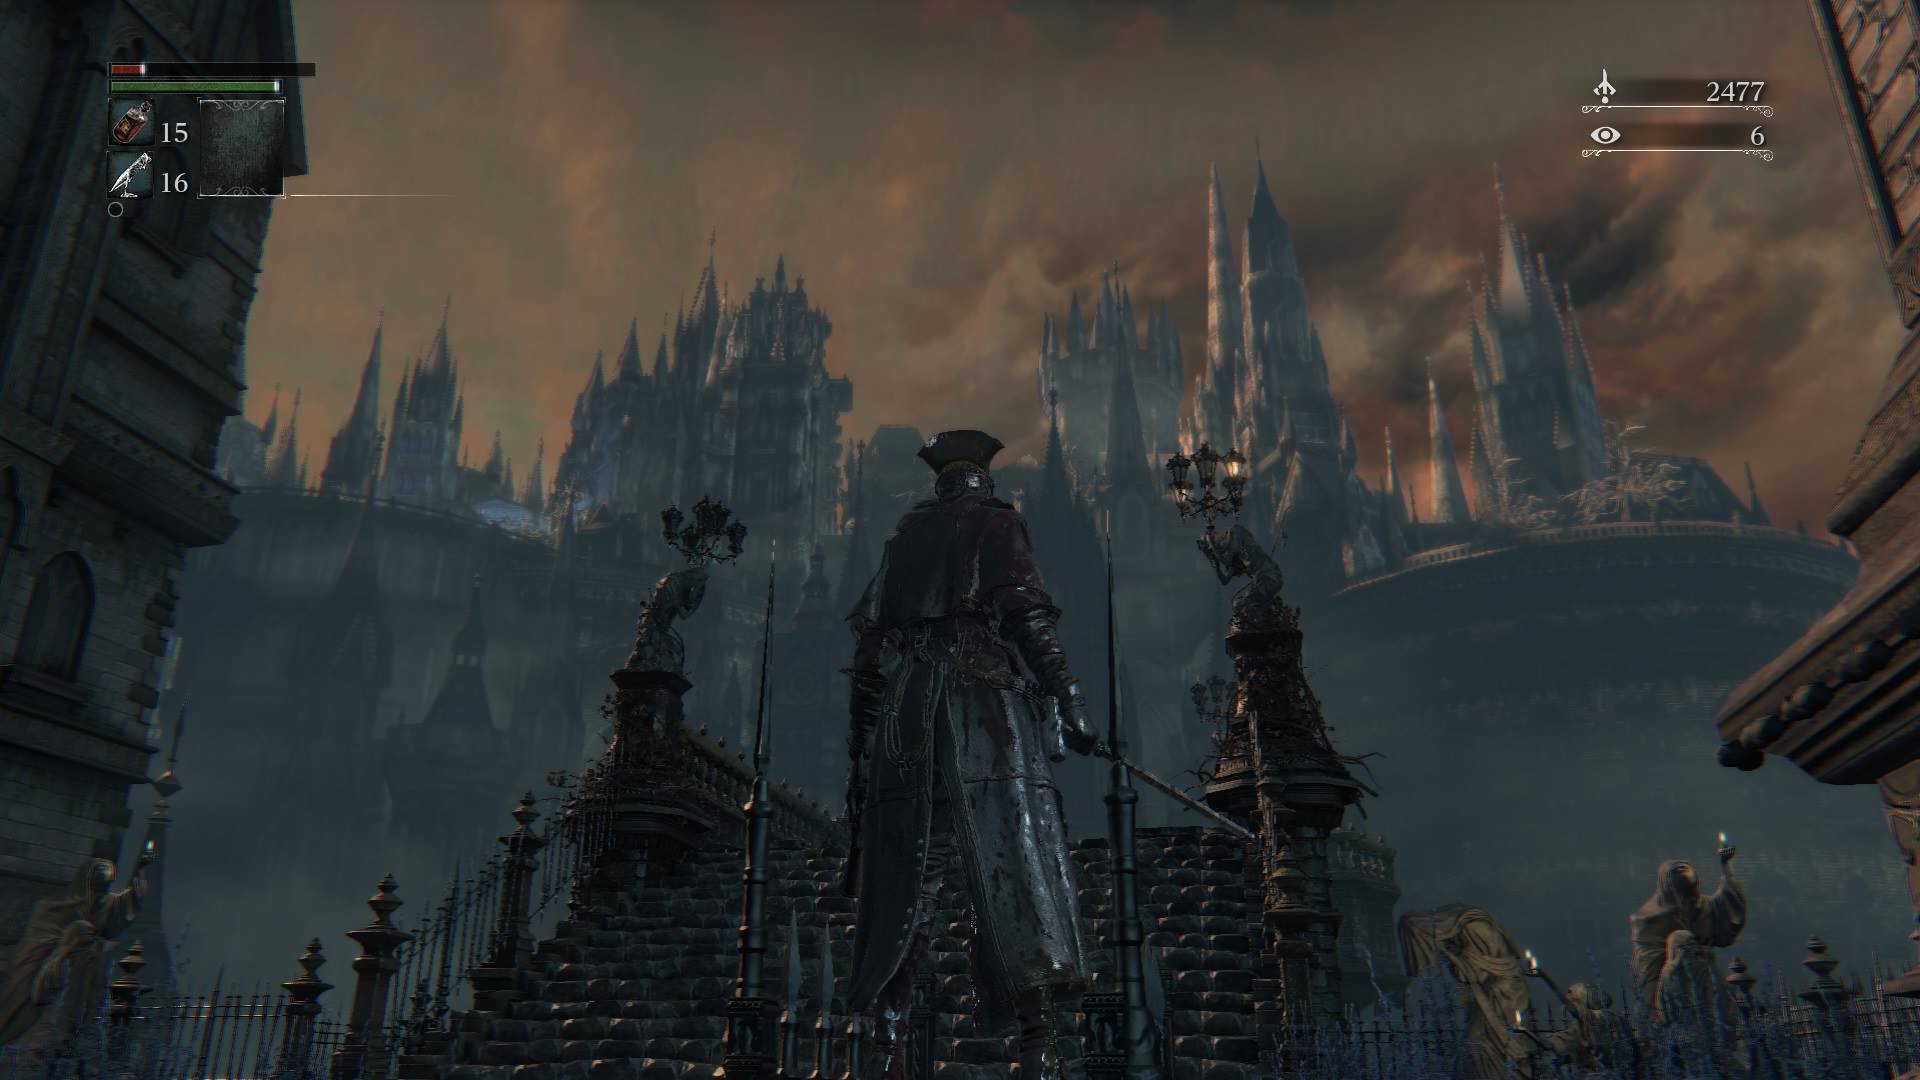 Bloodborne - Game of the Year (PS4) : : PC & Video Games